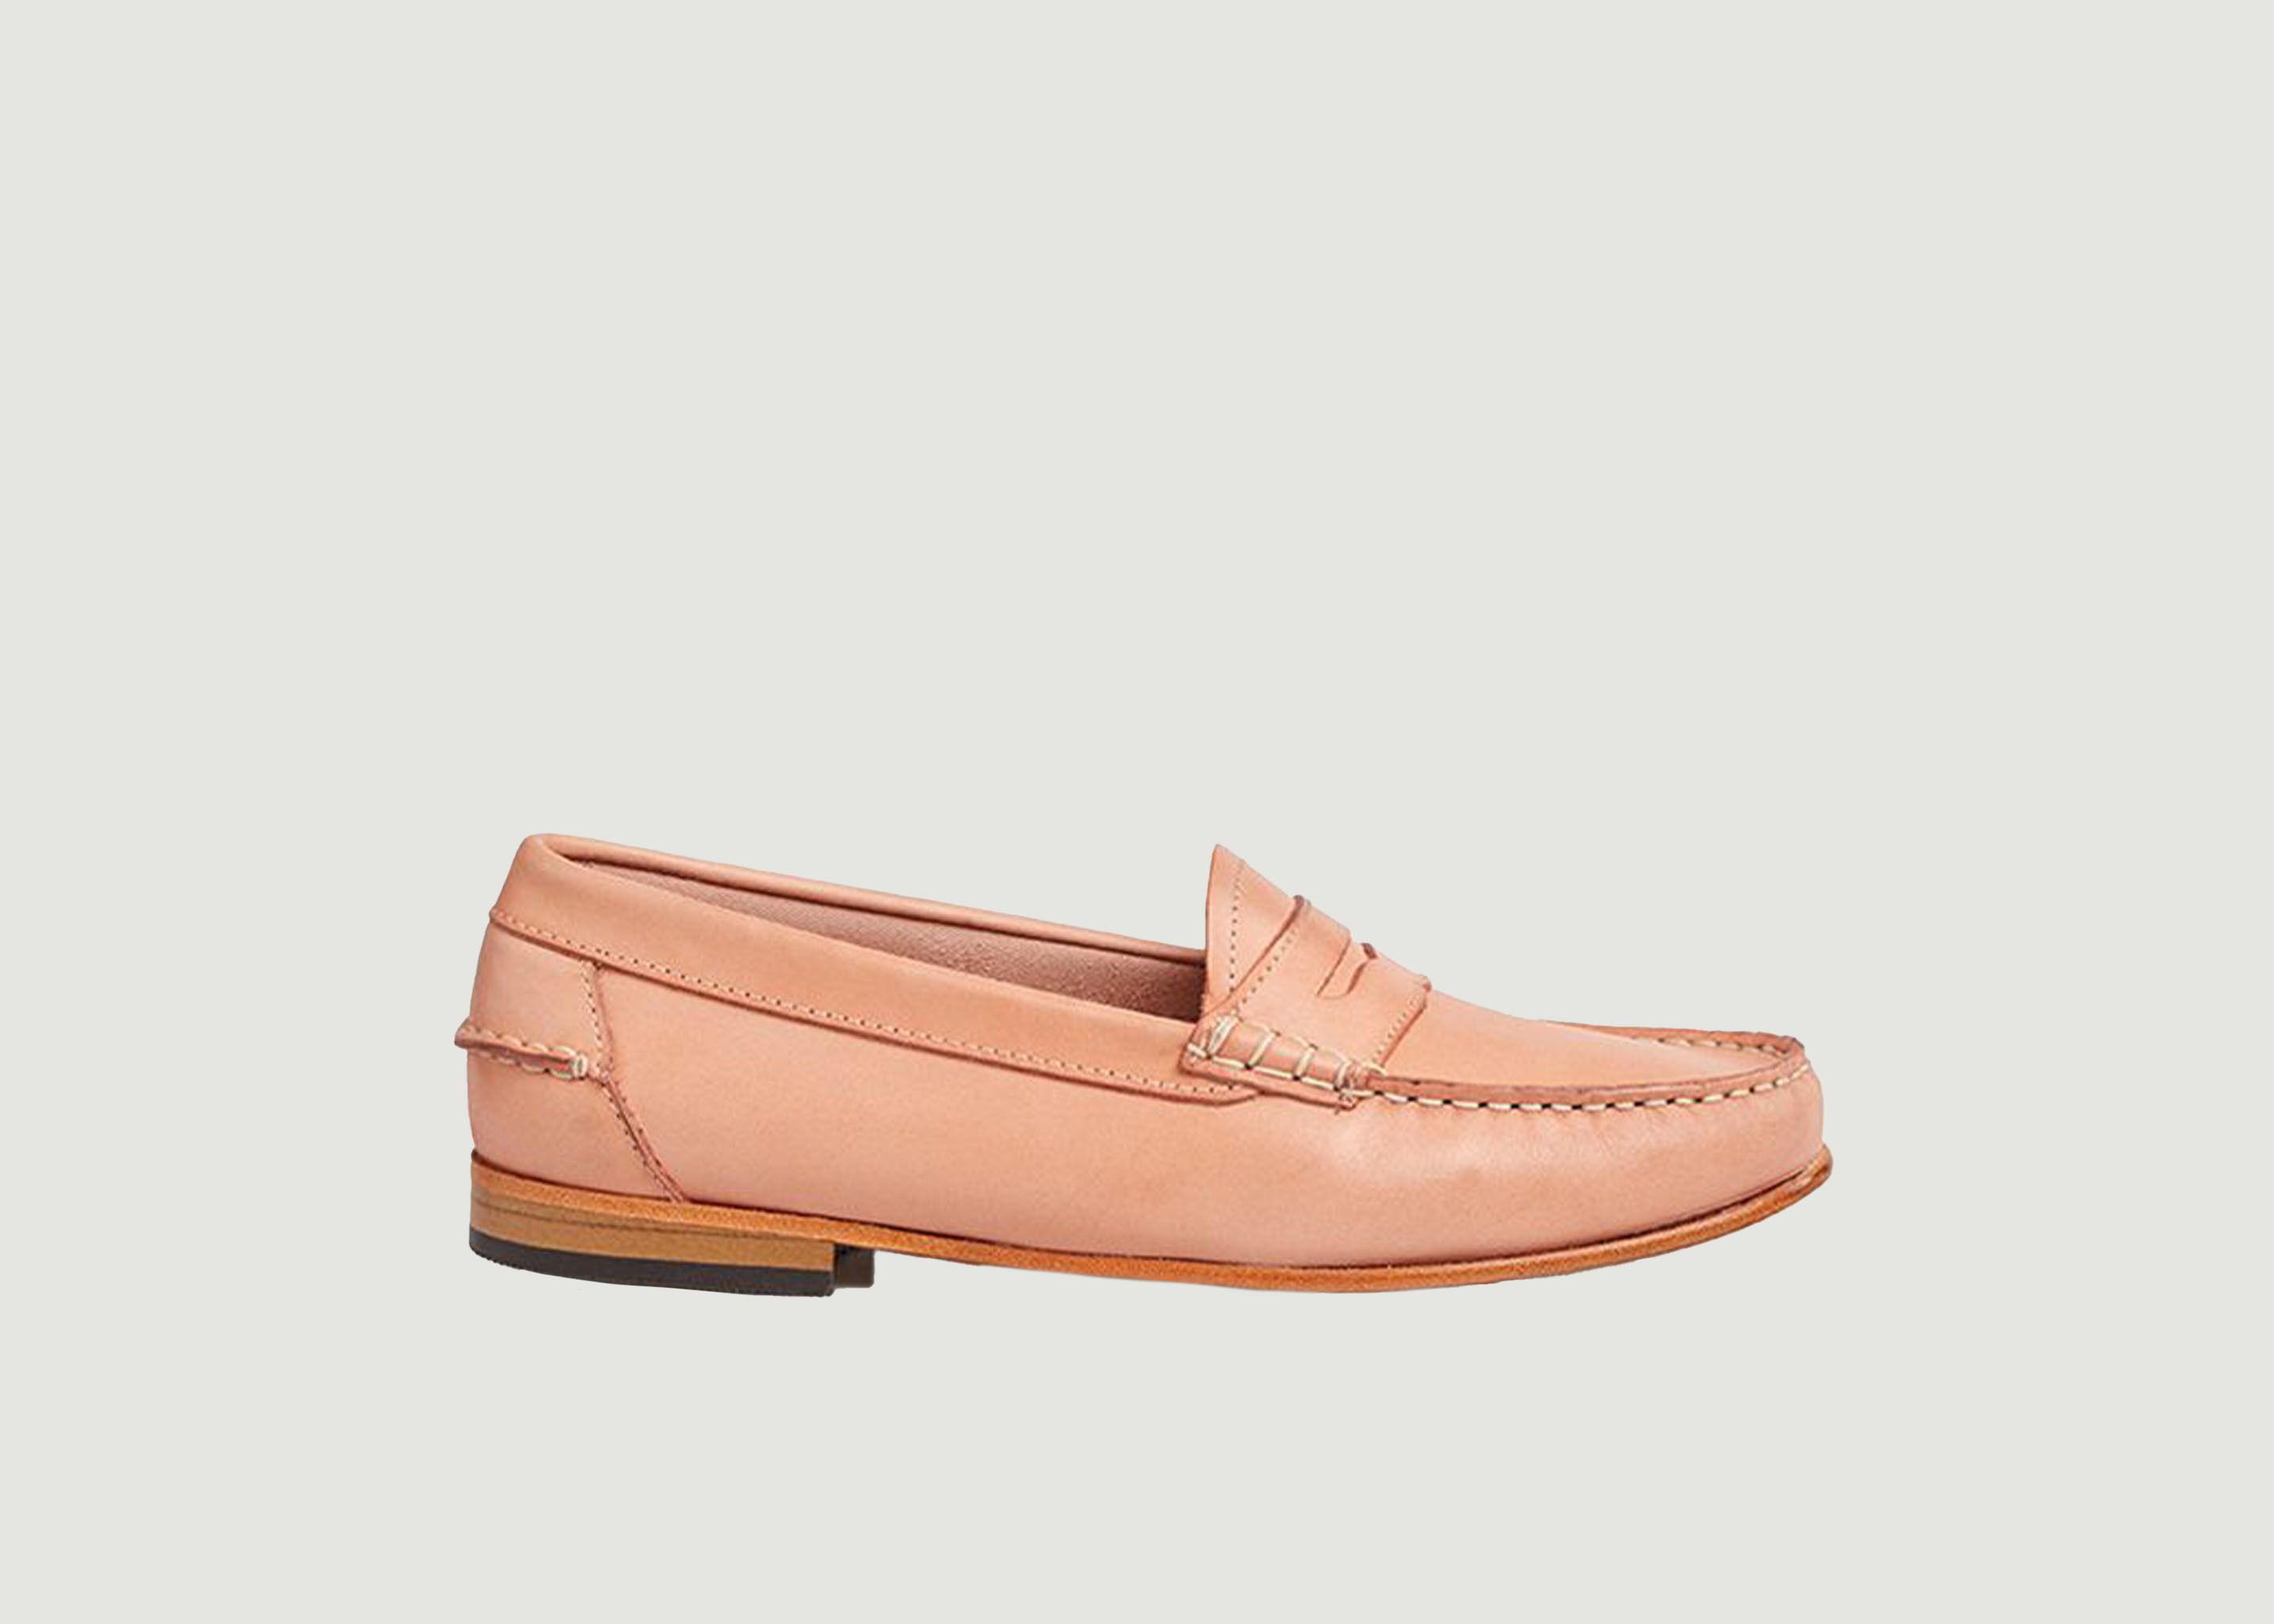 Weejuns Palm Spring Penny Soft Loafers - G.H.Bass